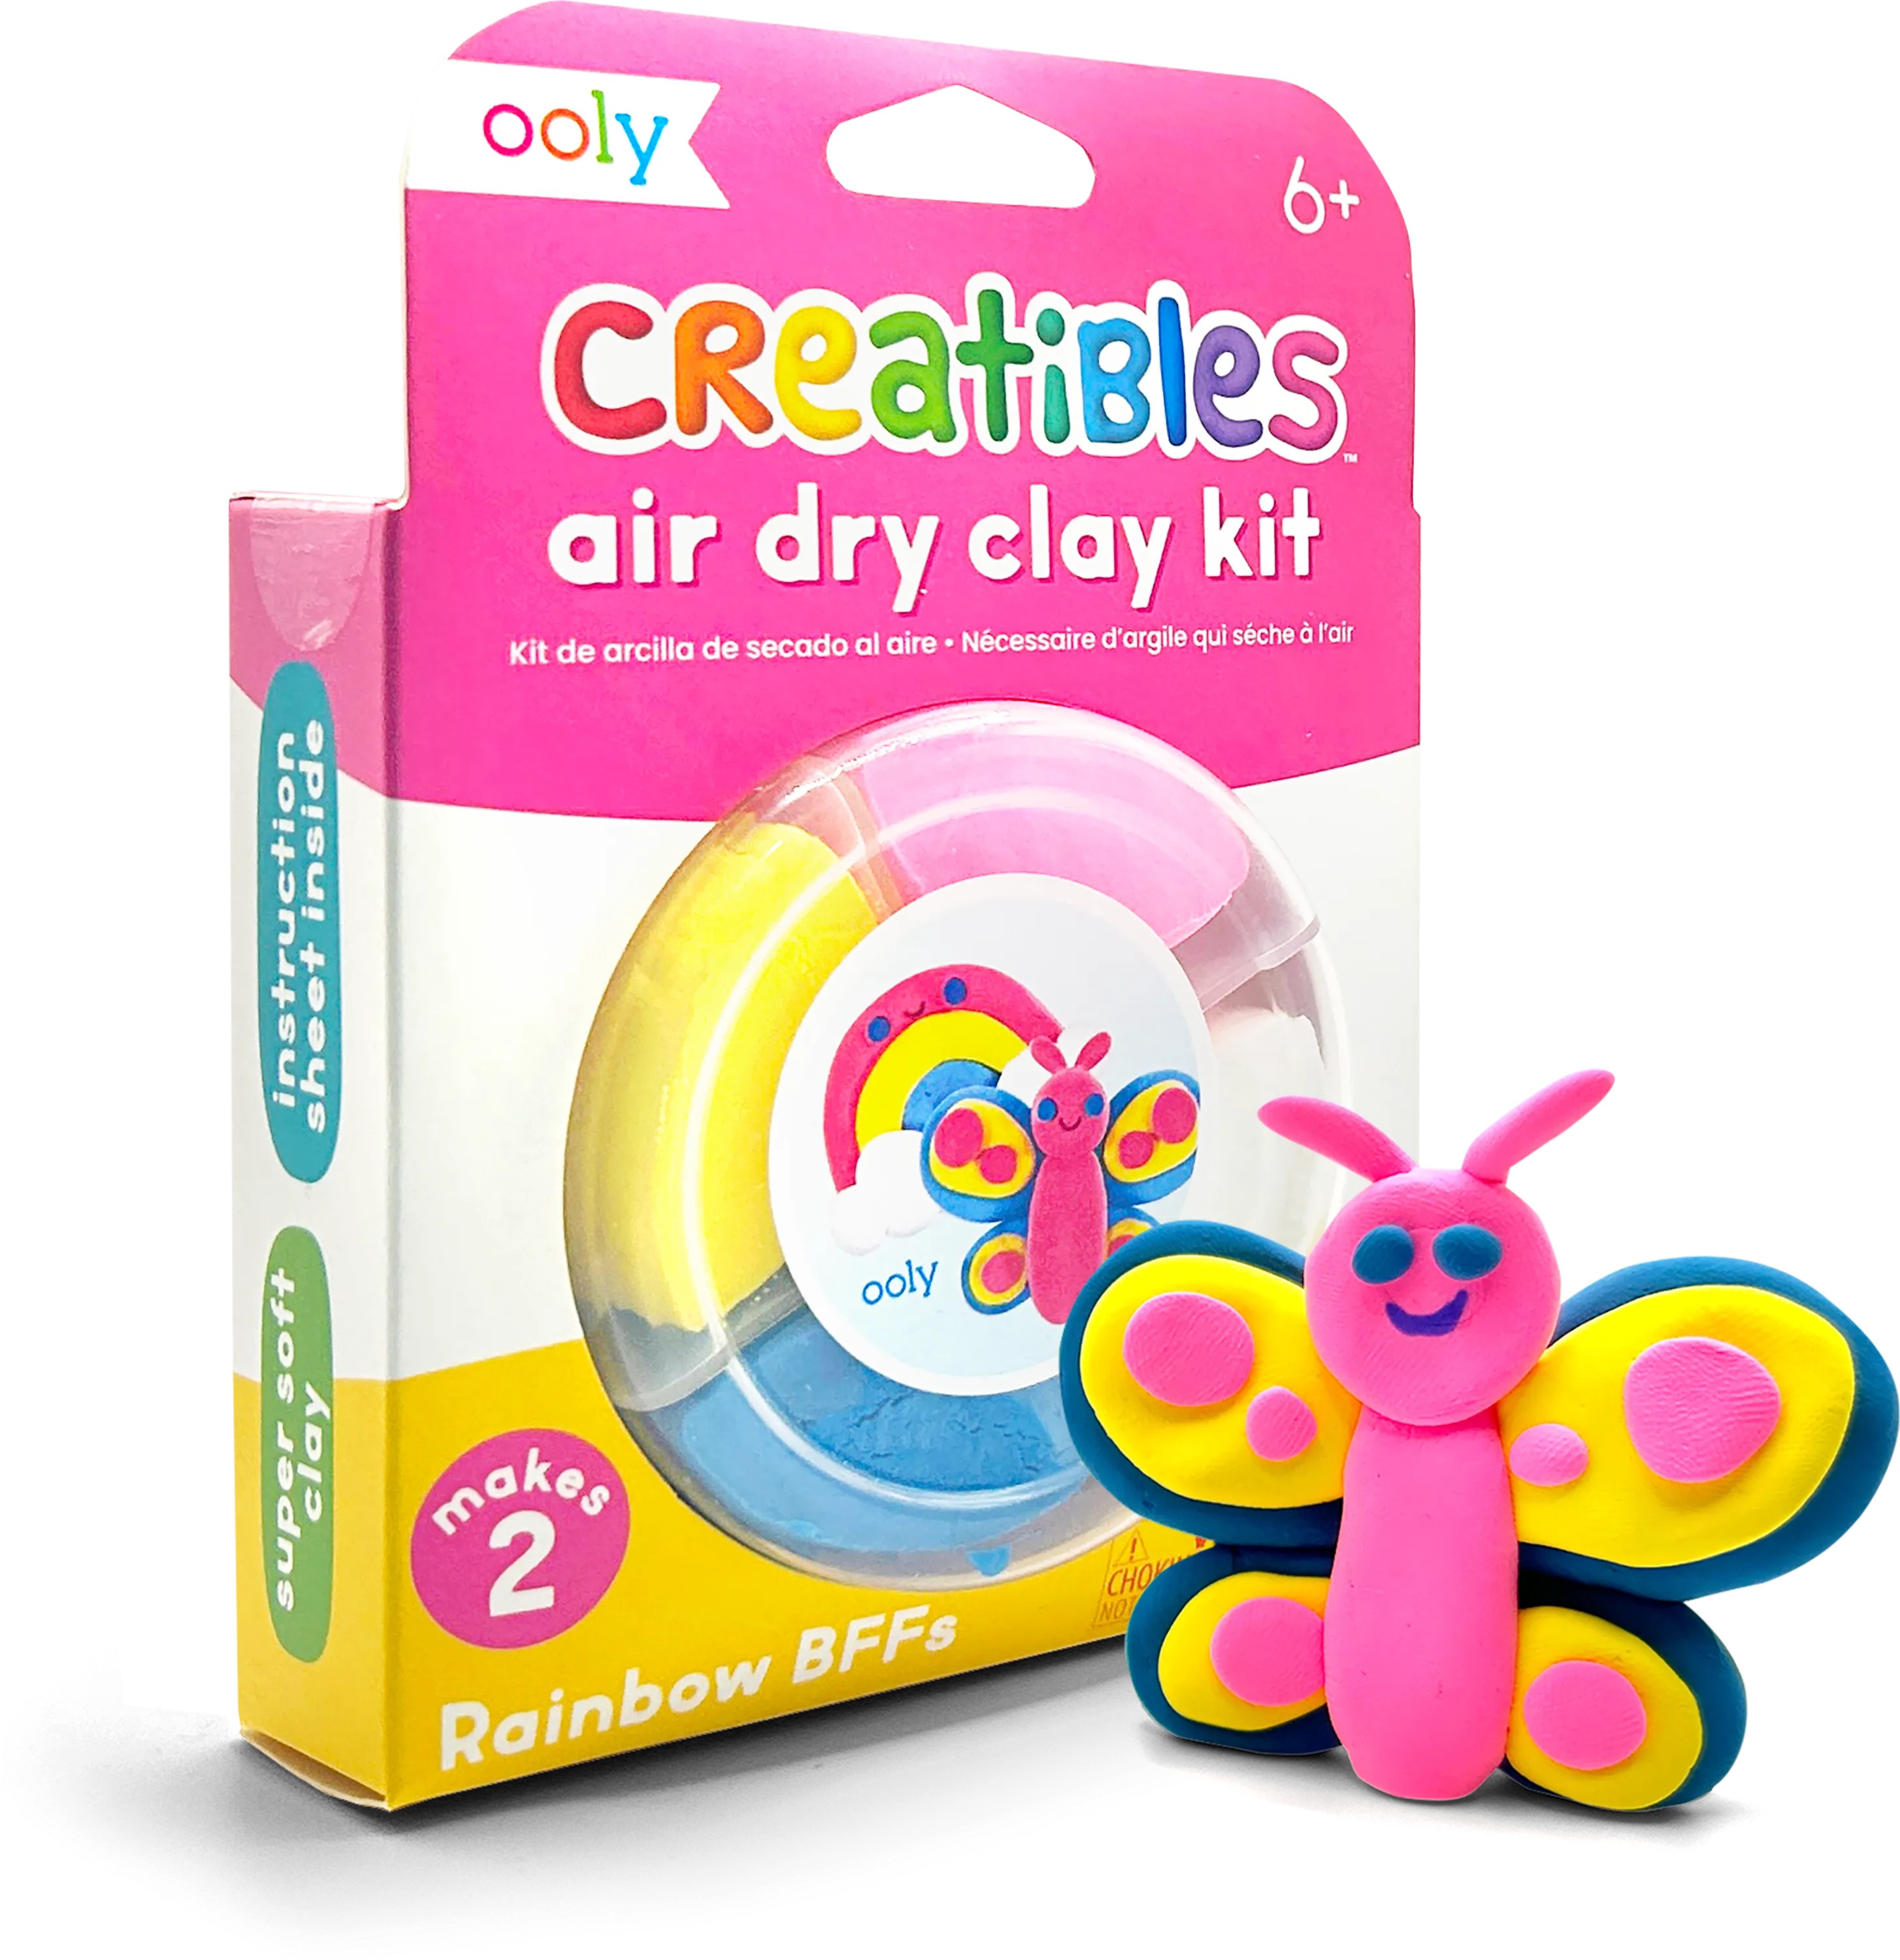 Quarter angle of packaging of OOLY Creatibles Mini Air Dry Clay Kit - Rainbow BFFs